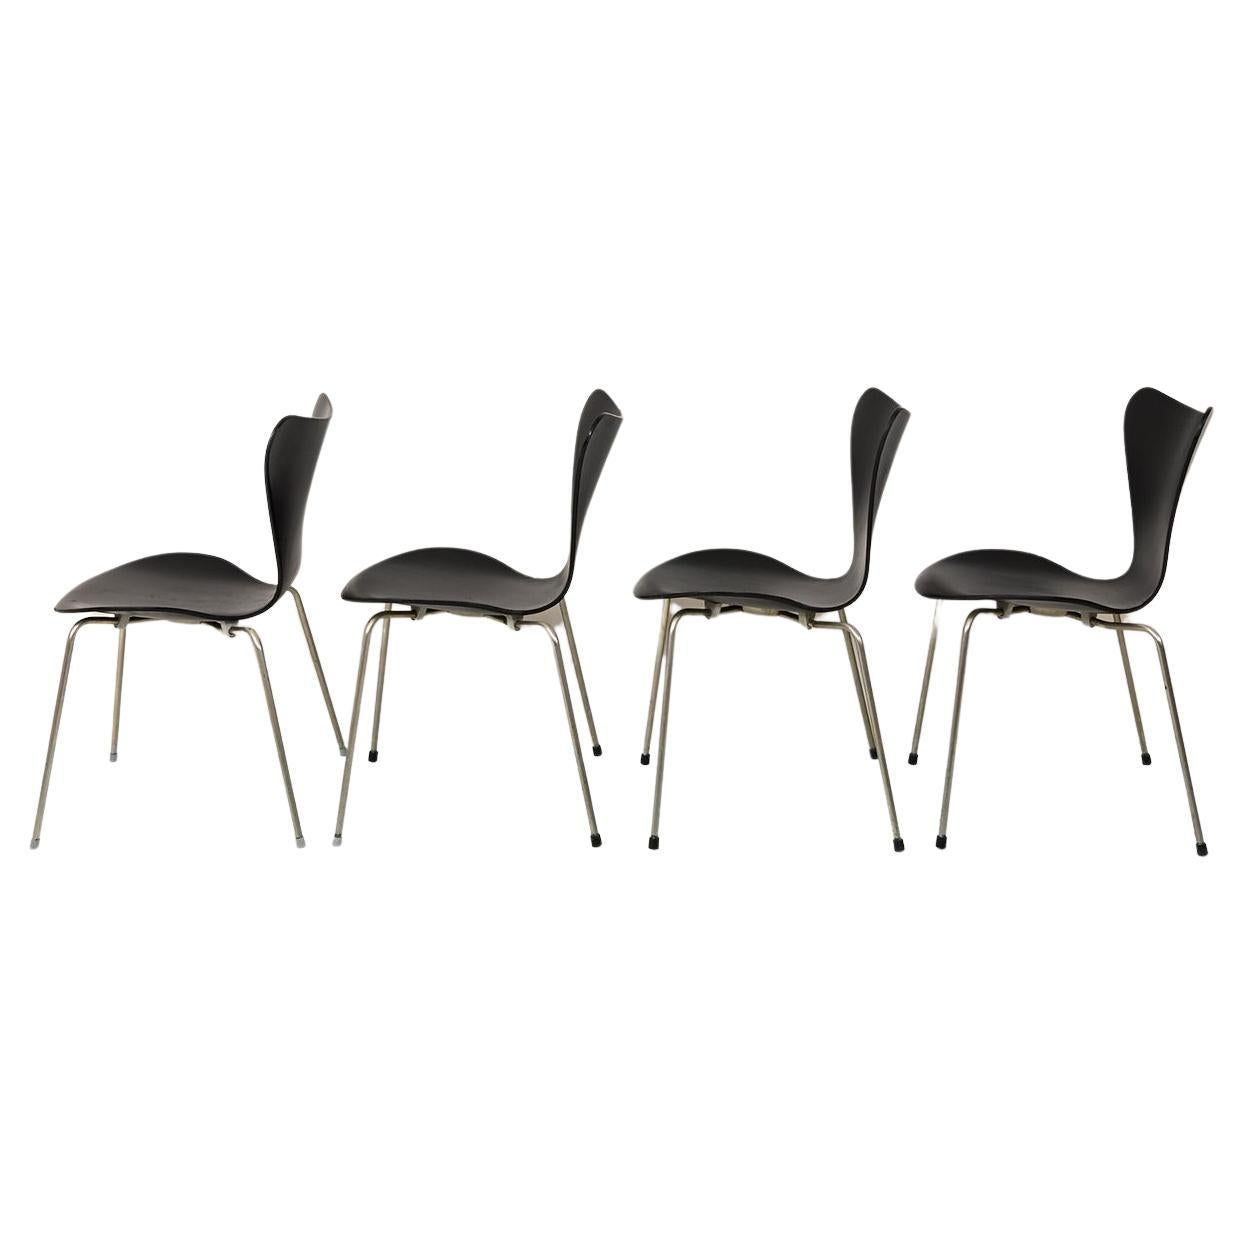 Set of 4 Chairs by Arne Jacobsen For Sale